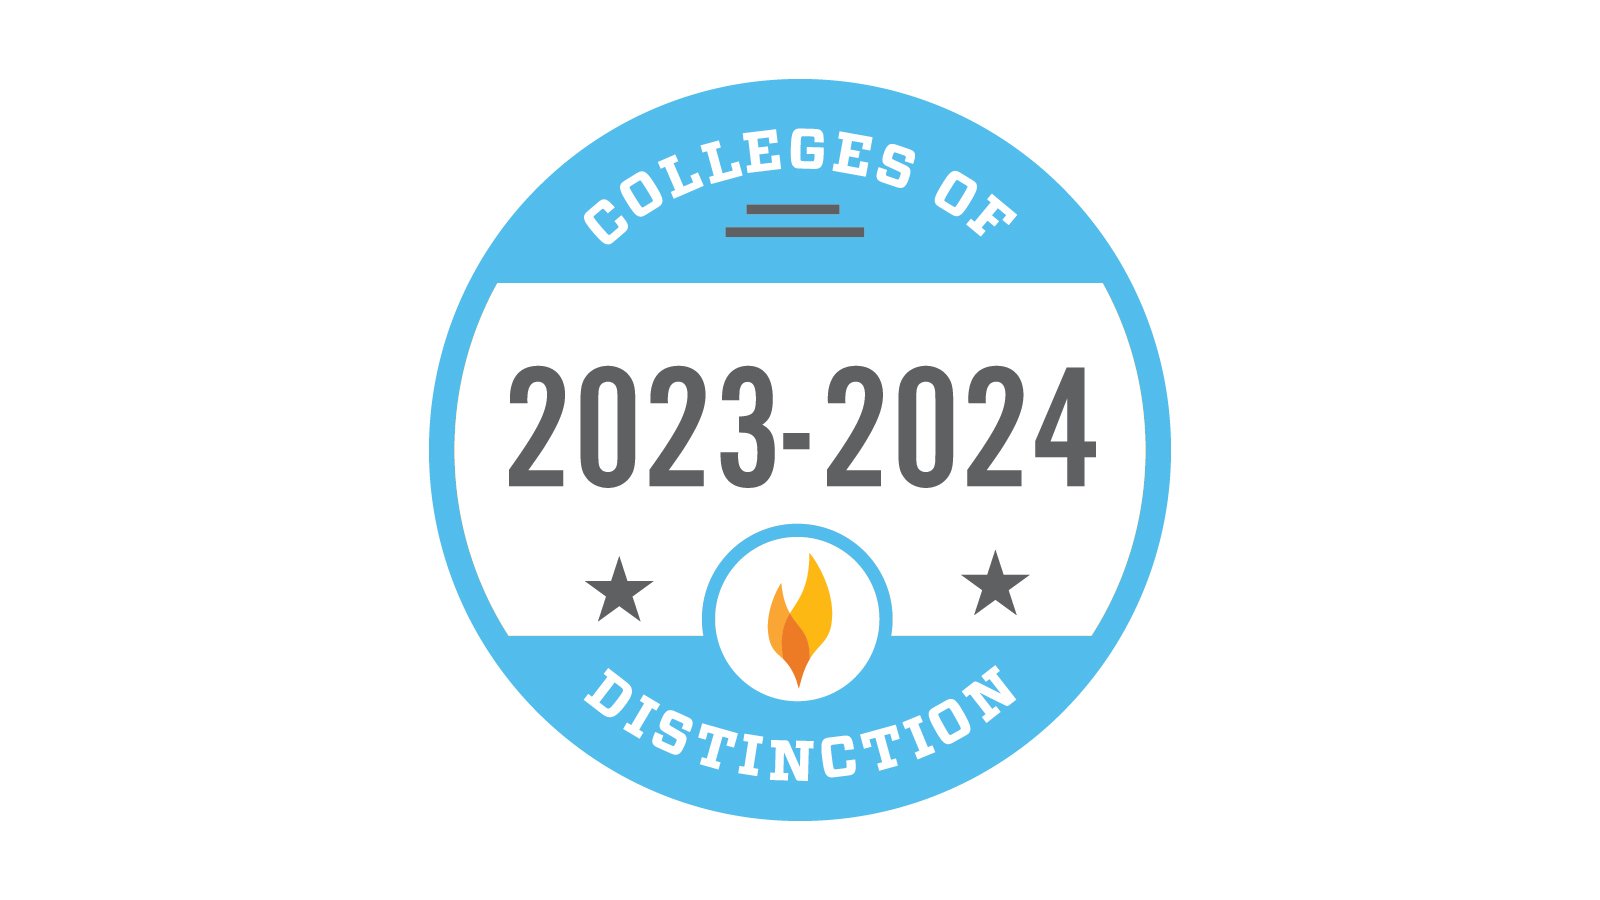 Neumann University Named a College of Distinction